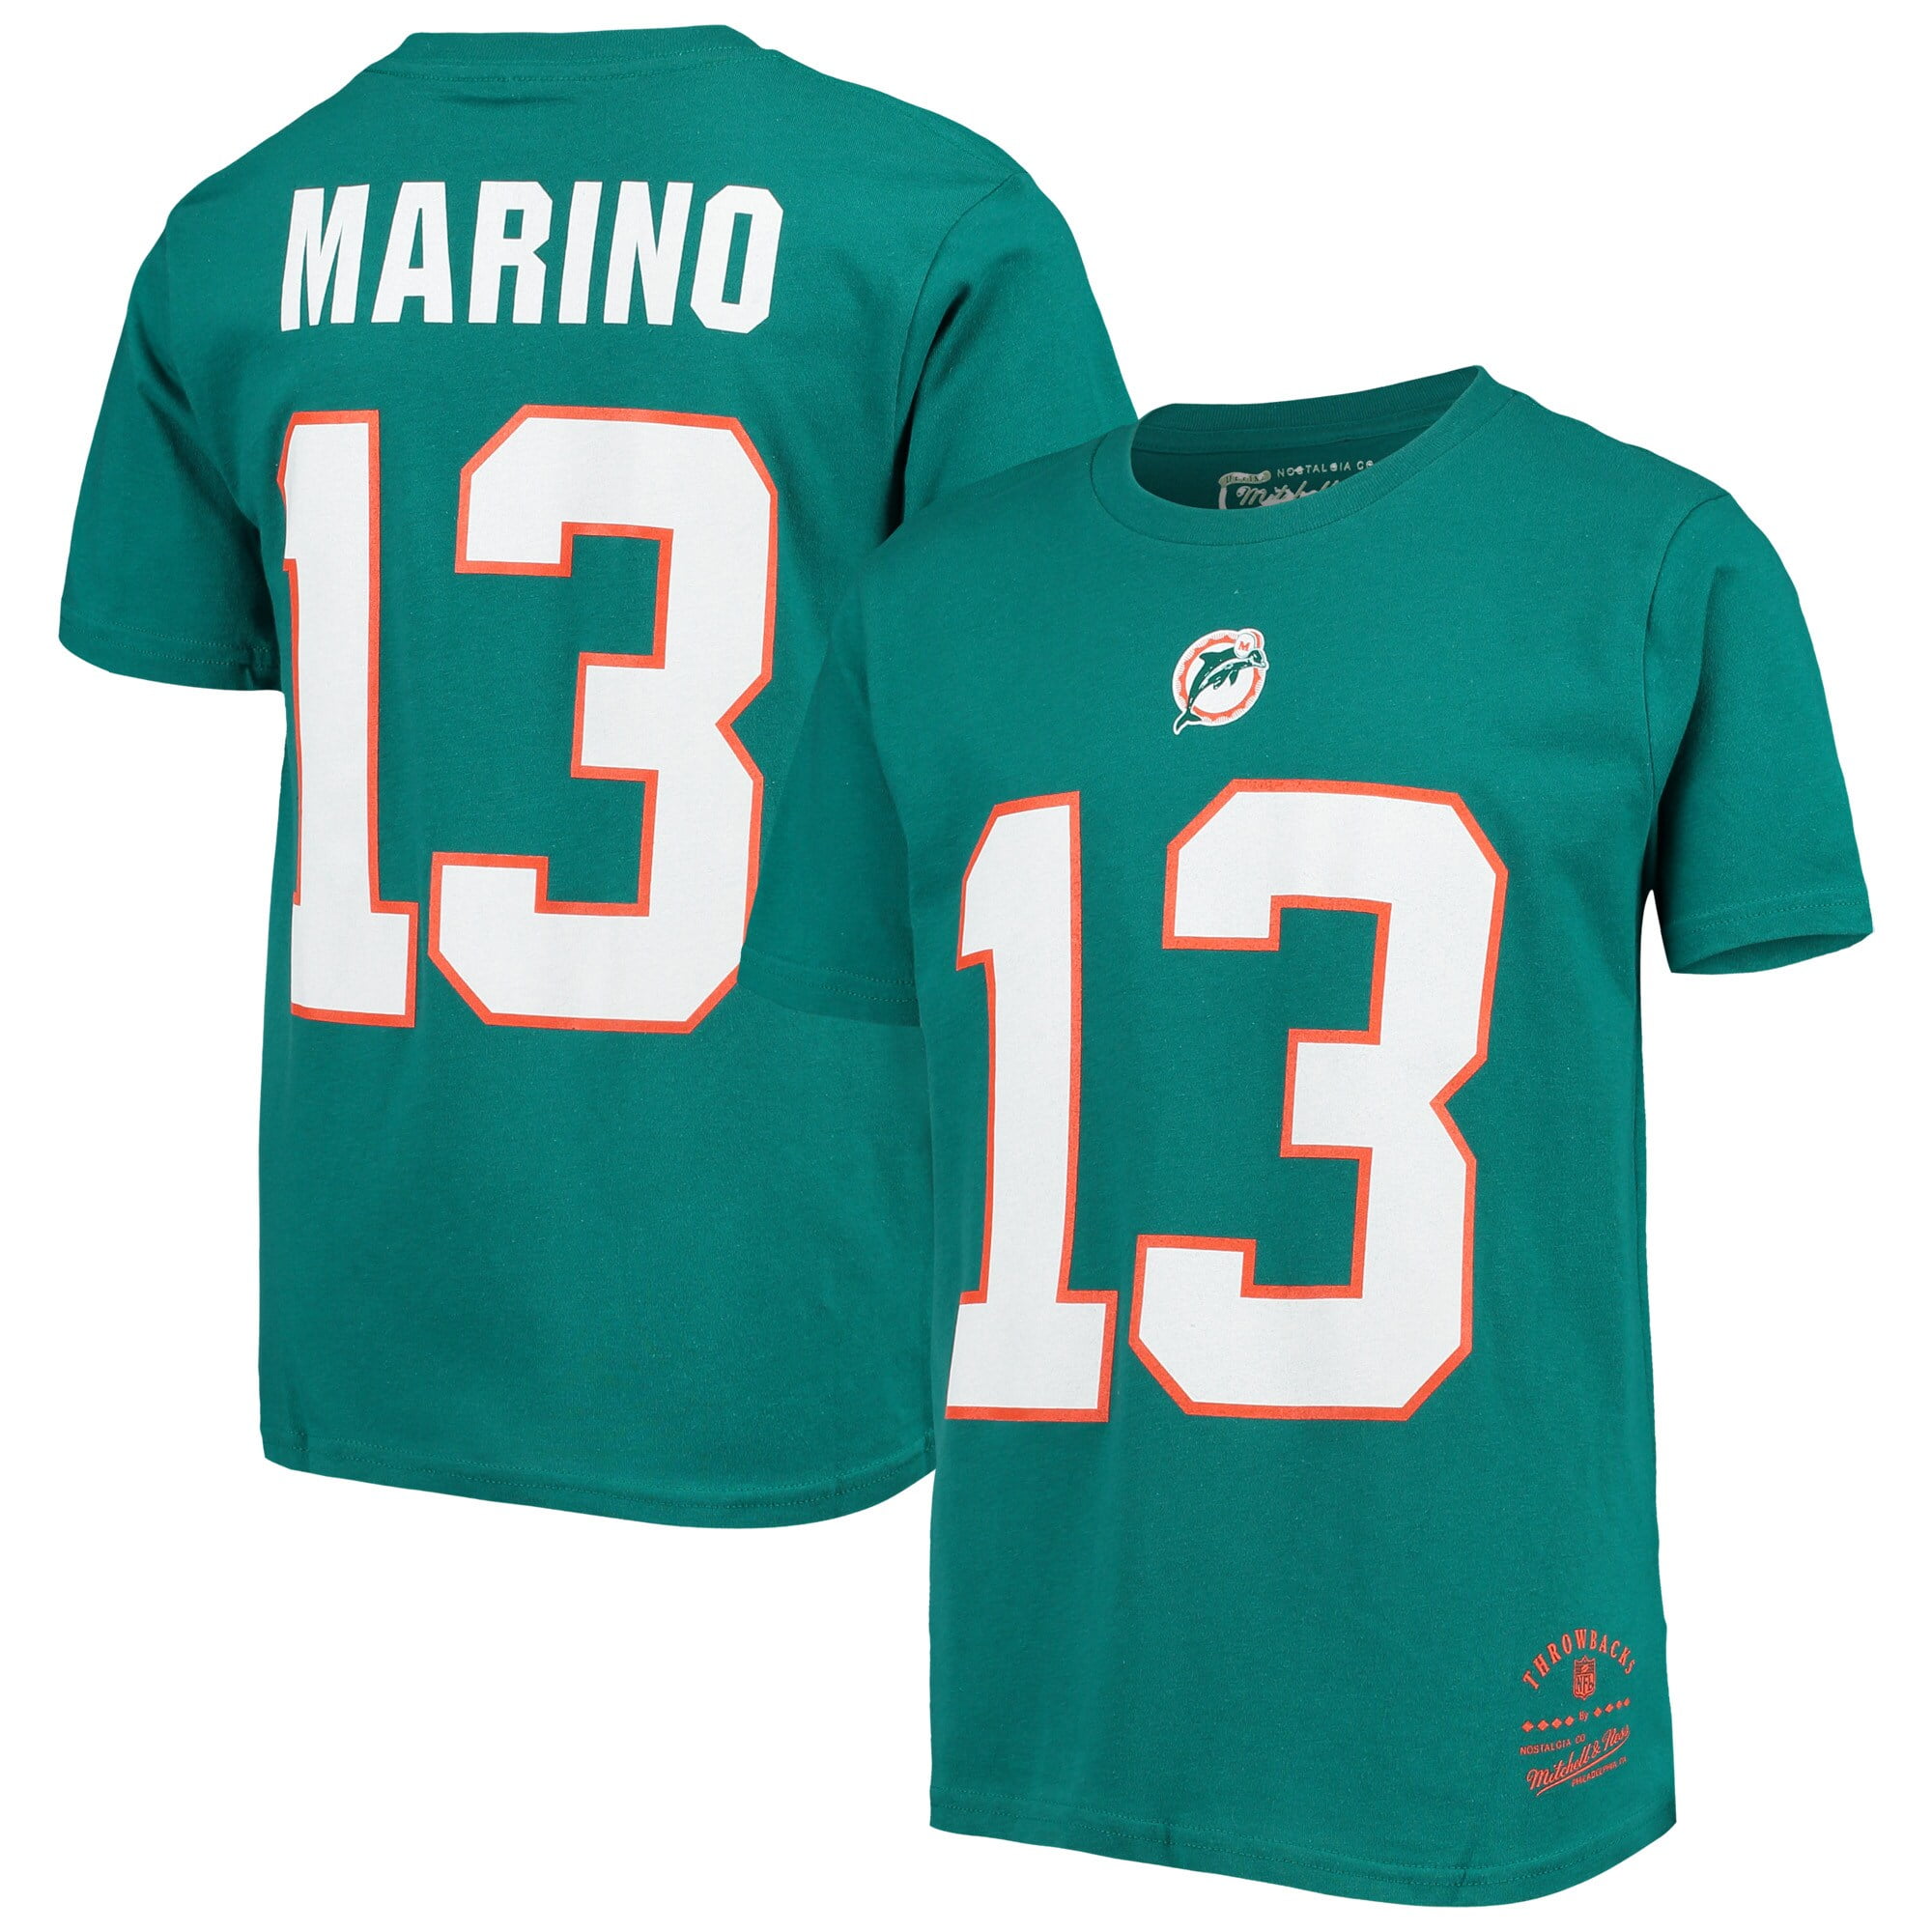 dolphins retired jersey numbers